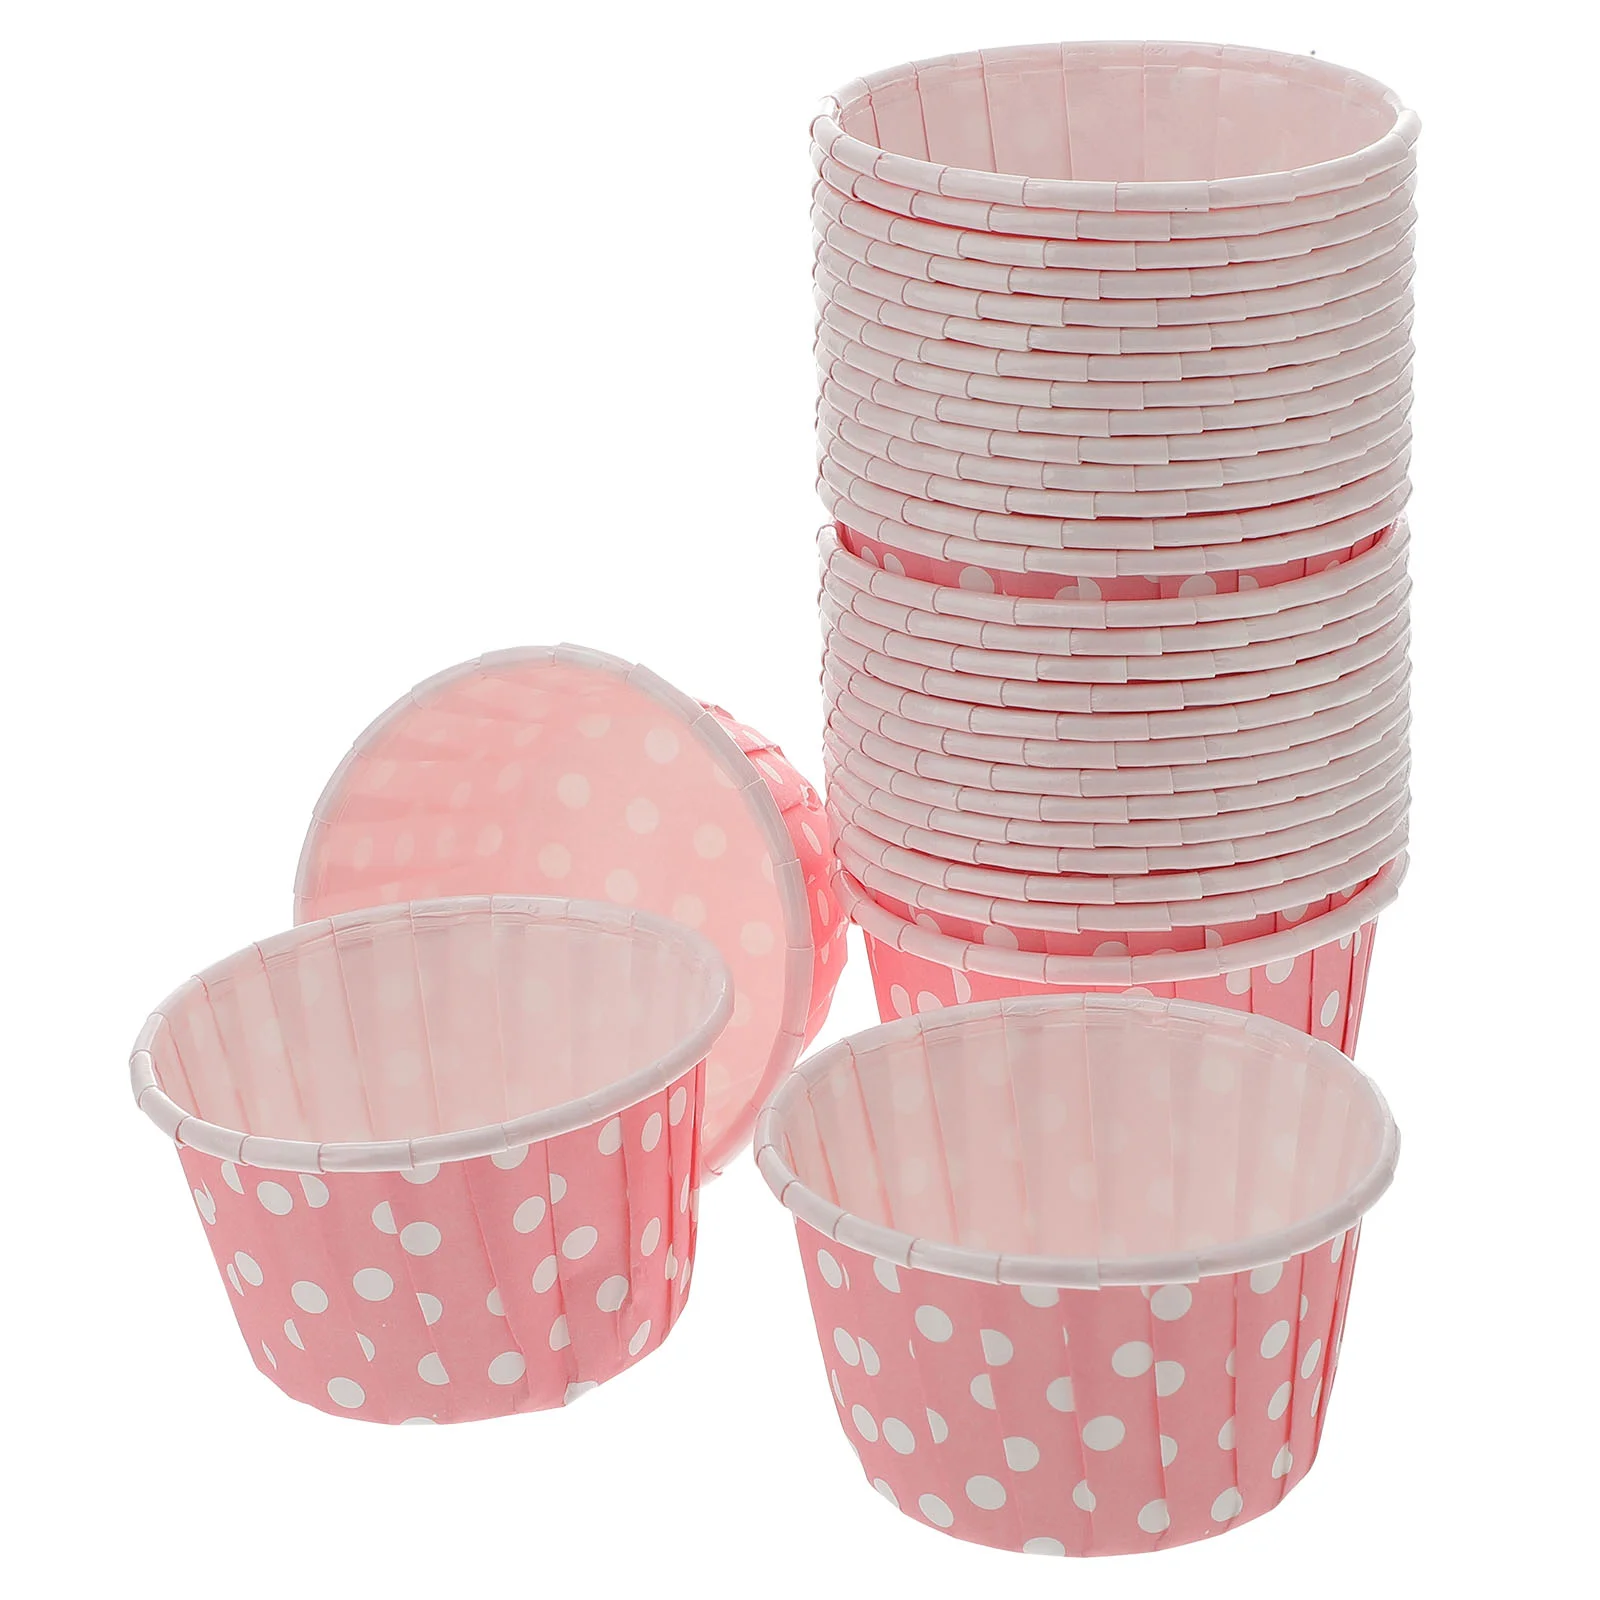 

50 Pcs Ice Cream Cups Cake Containers Lids Cupcake Wrappers Salad Bowl Meal Prep Bowls Paper Yogurt Cups Disposable